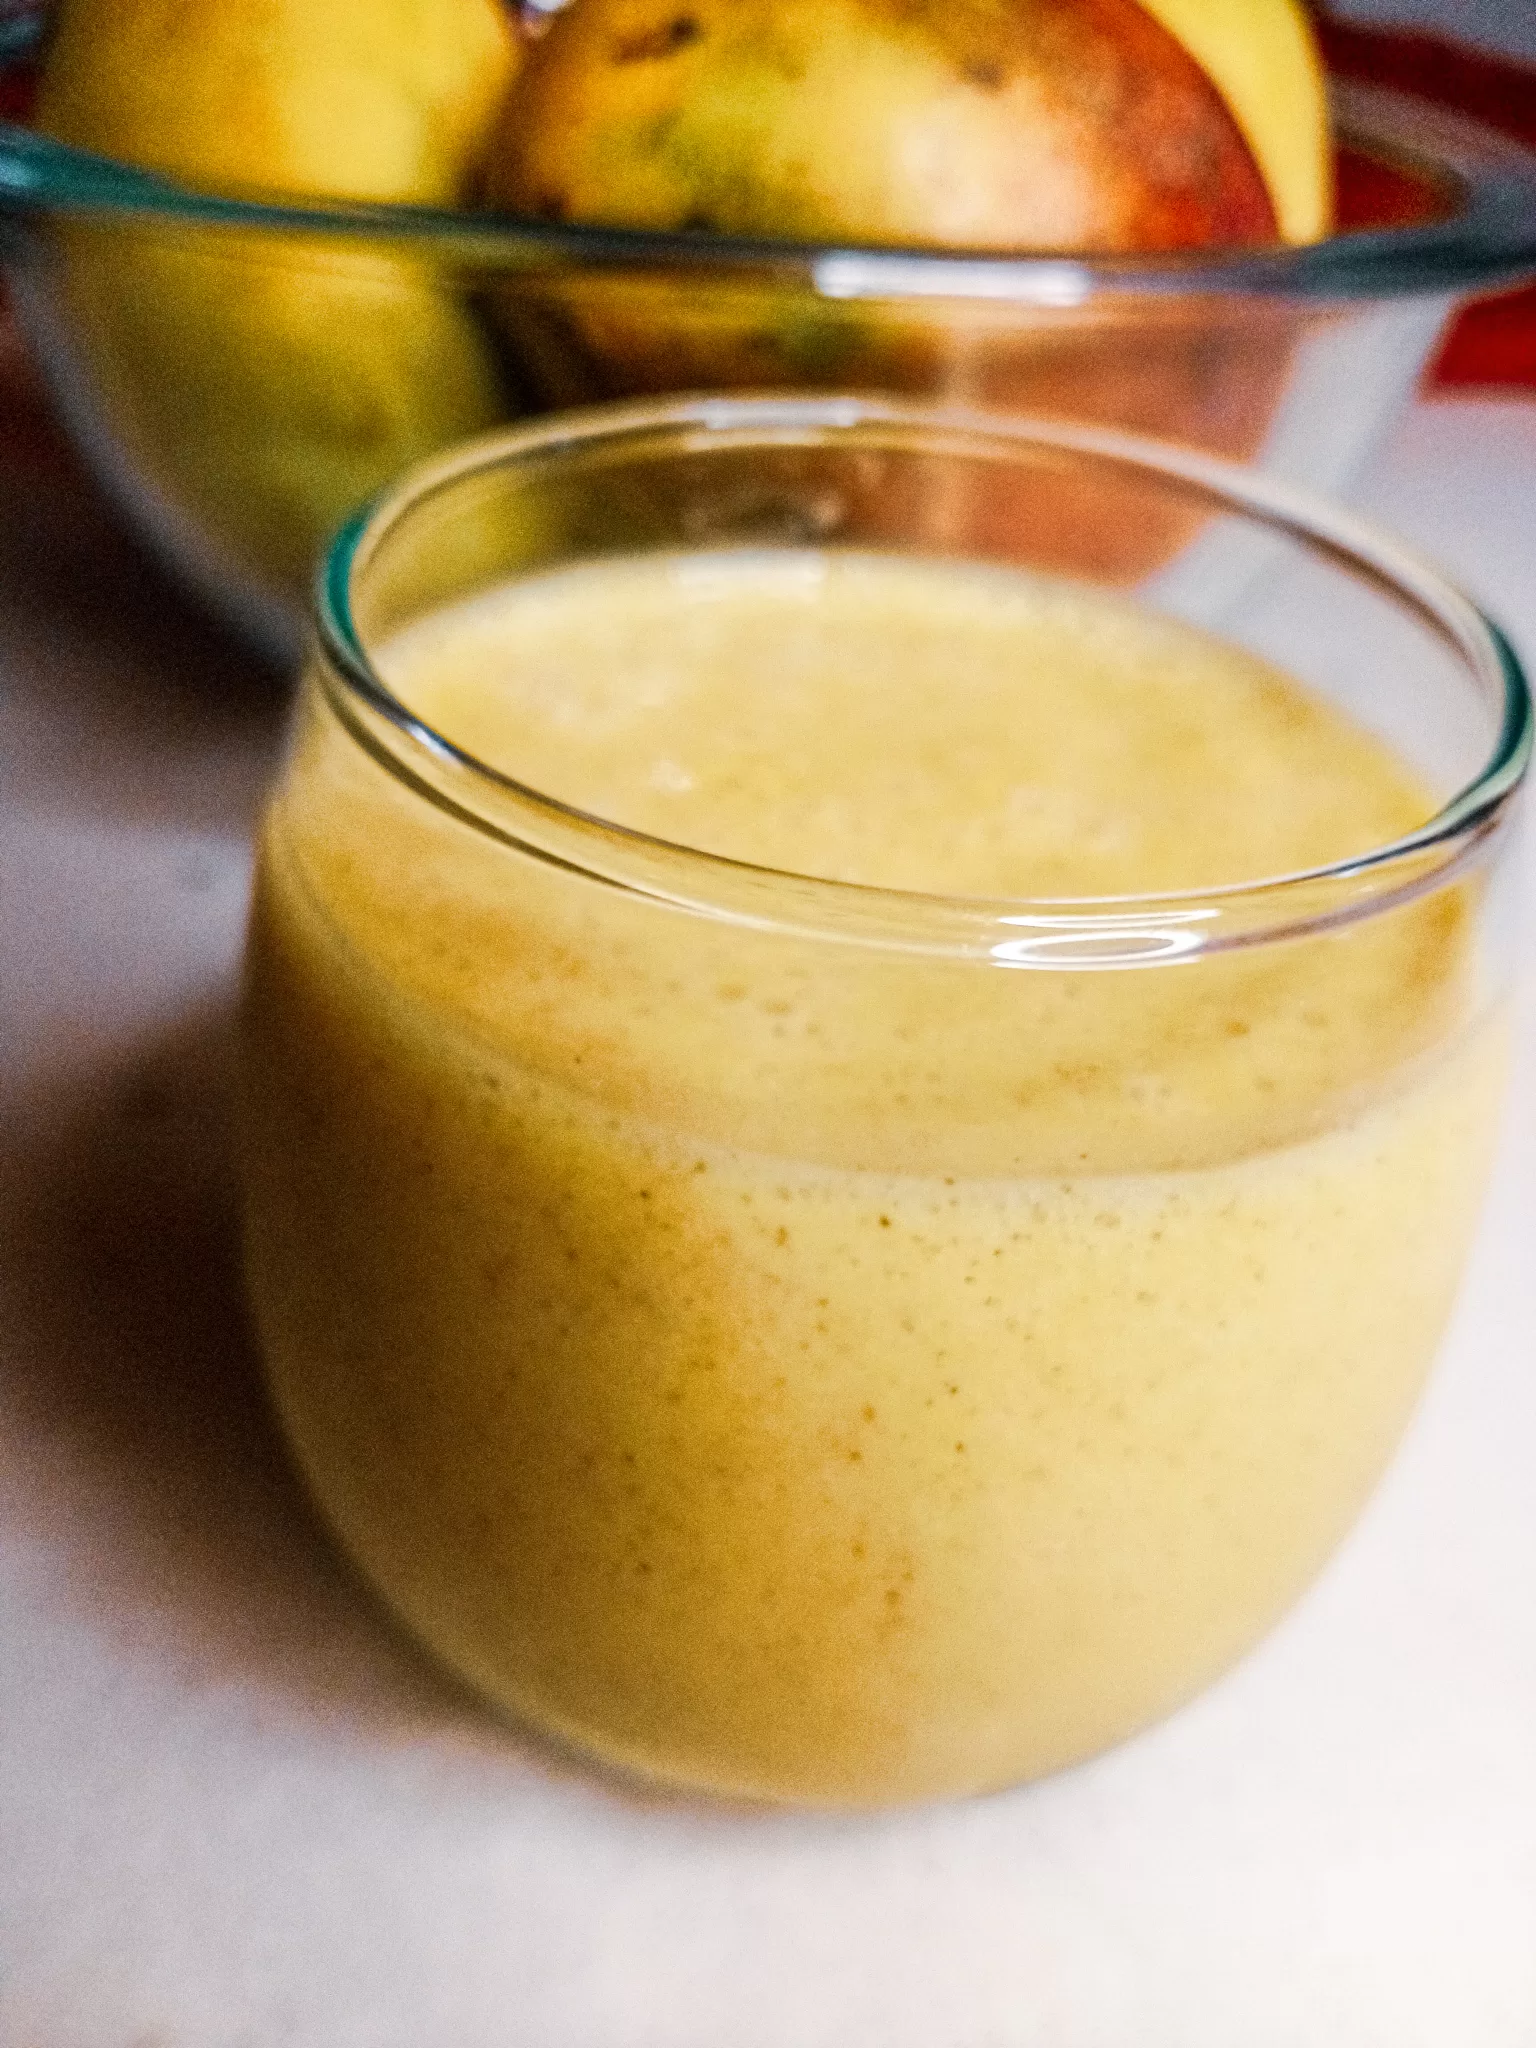 Mango smoothie In a glass